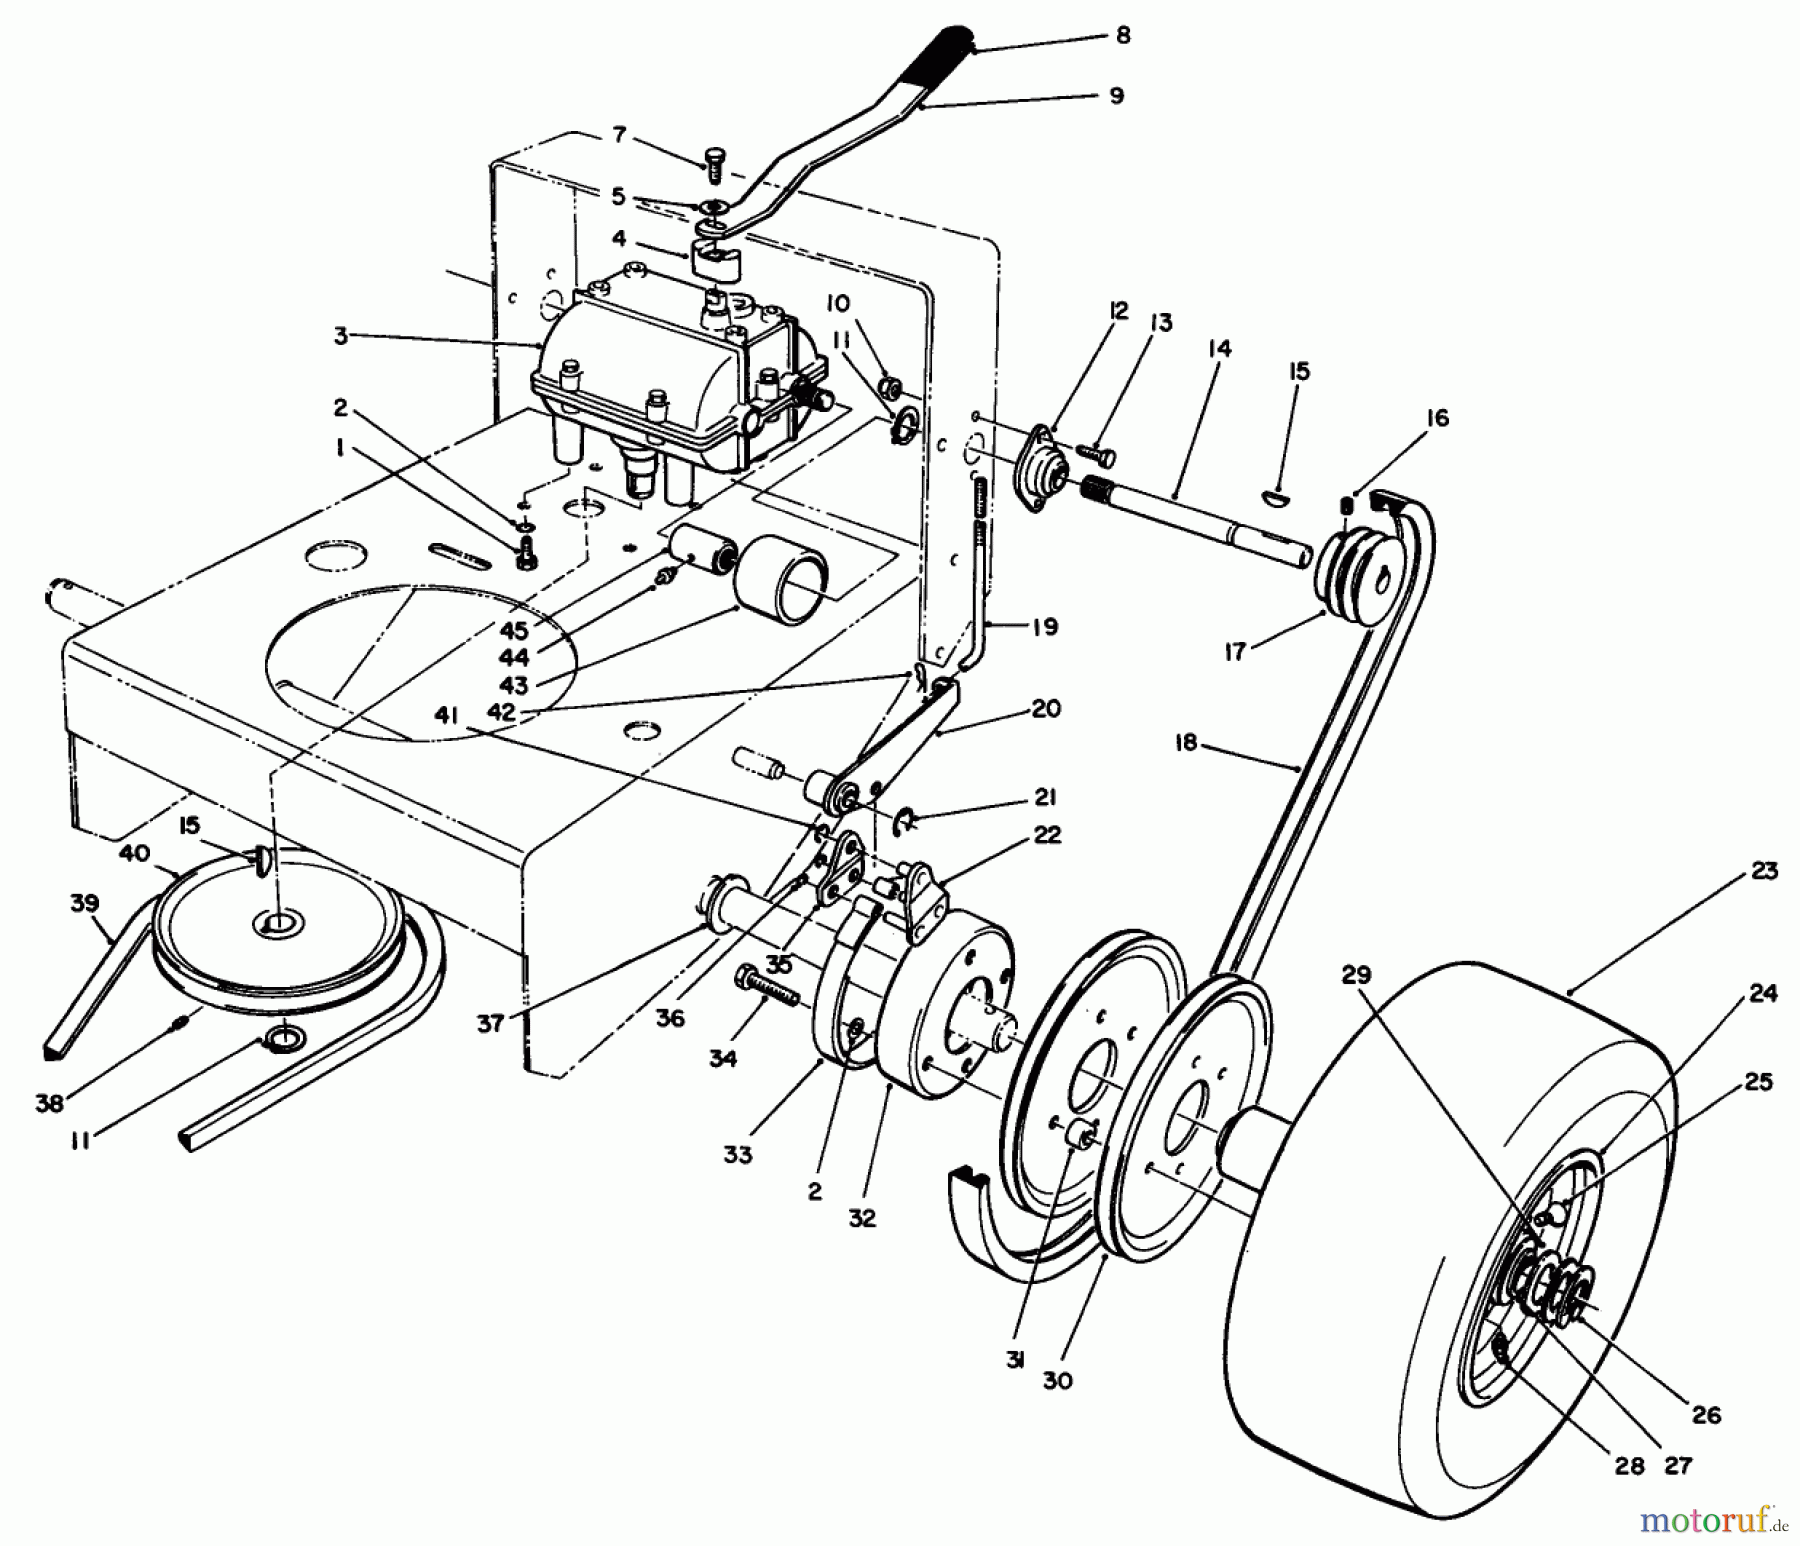  Toro Neu Mowers, Drive Unit Only 30106 - Toro Mid-Size Proline Gear Traction Unit, 12.5 hp, 1990 (0000001-0999999) AXLE ASSEMBLY